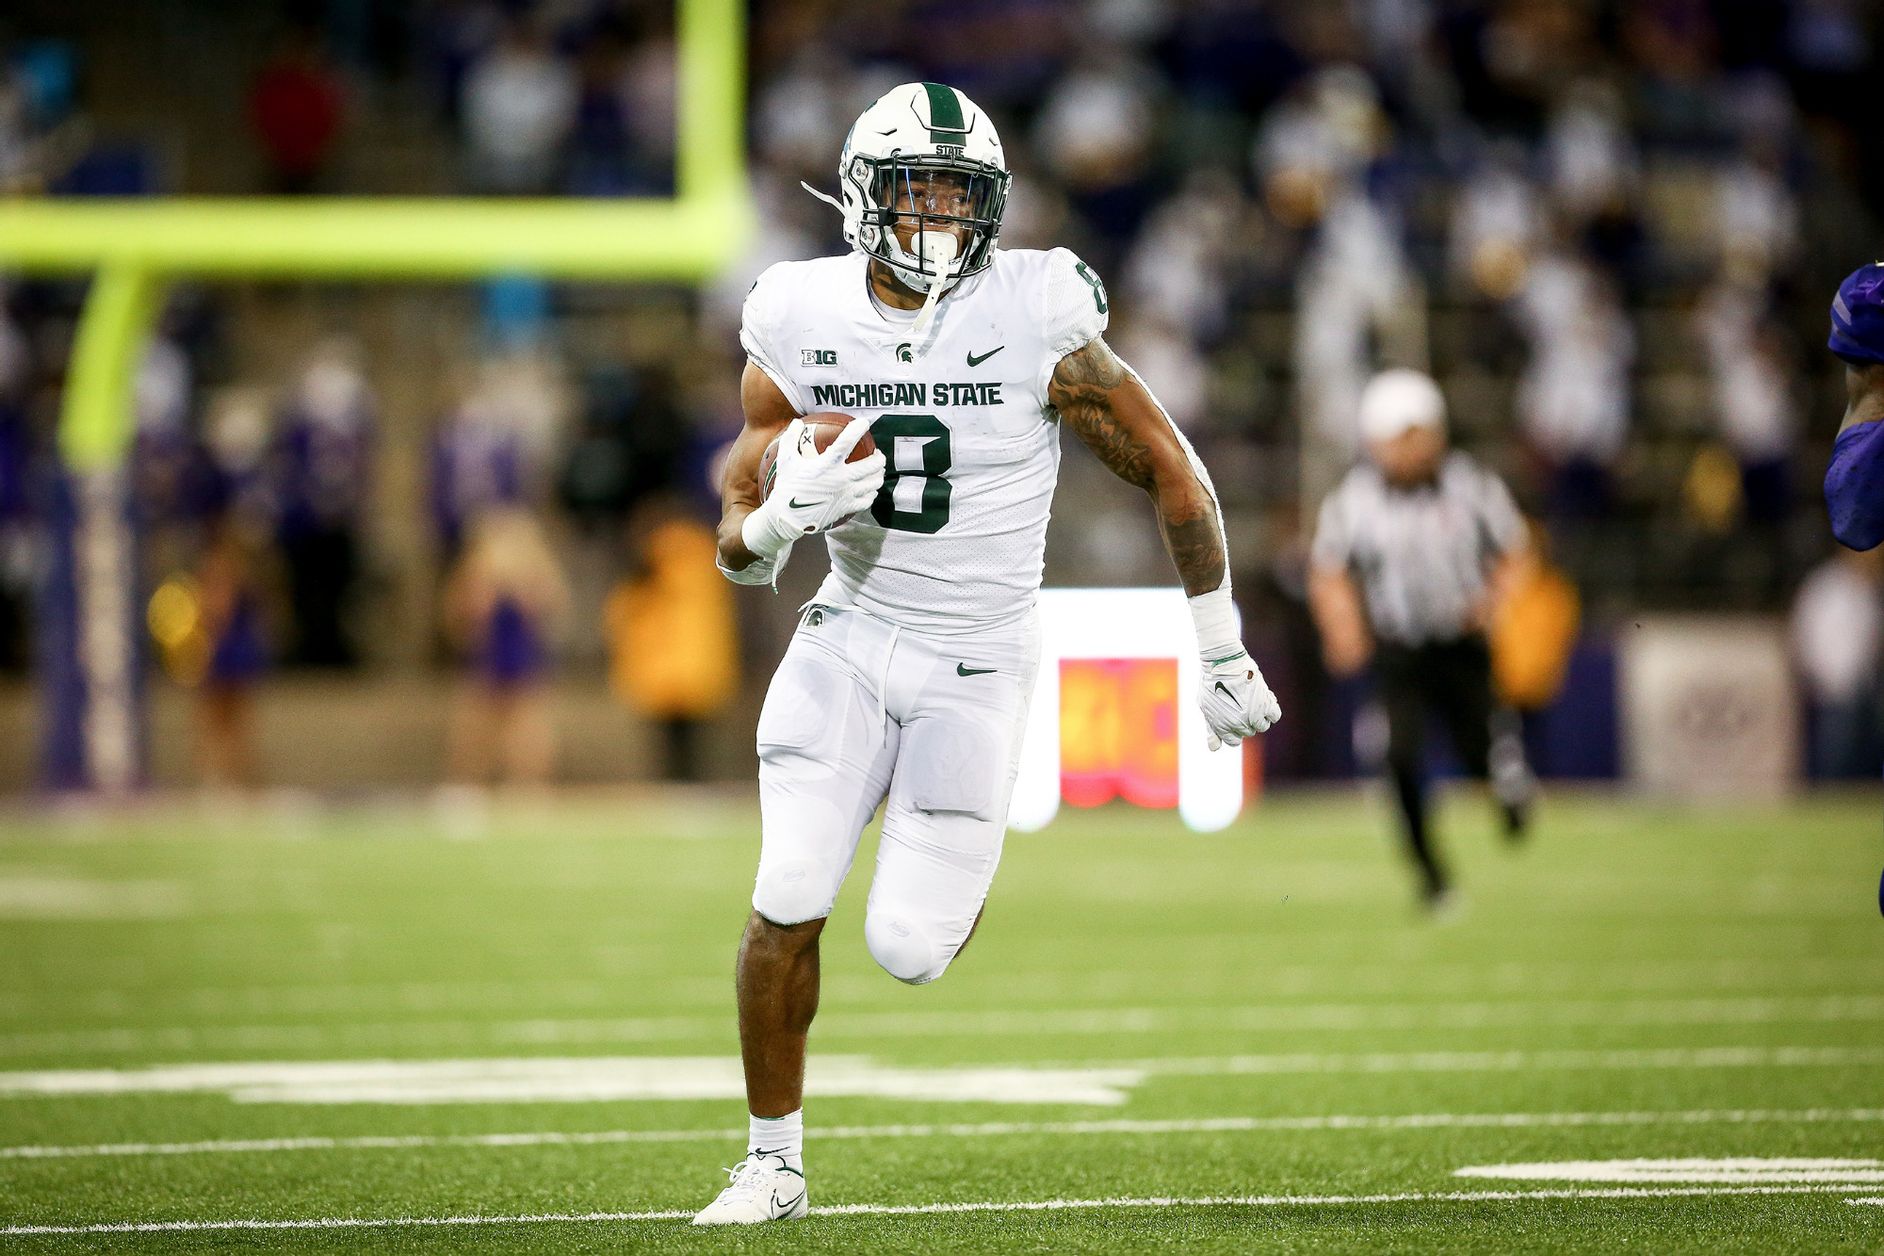 Game Preview: Michigan State at Maryland